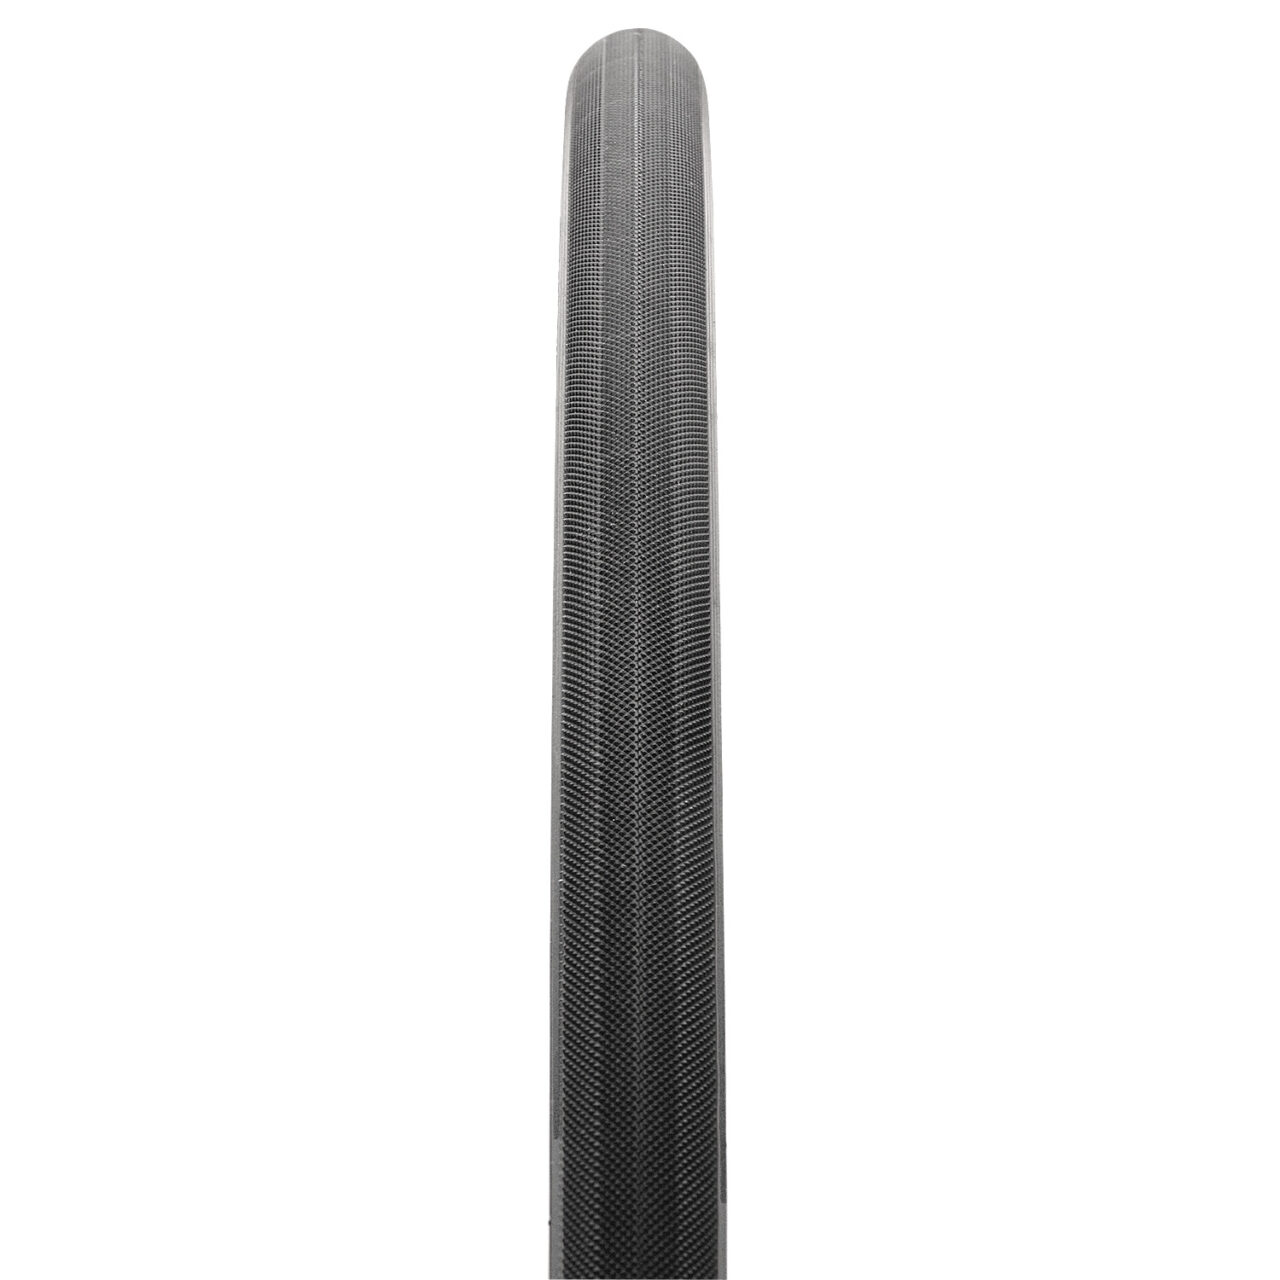 Maxxis Re-Fuse bicycle tire tread